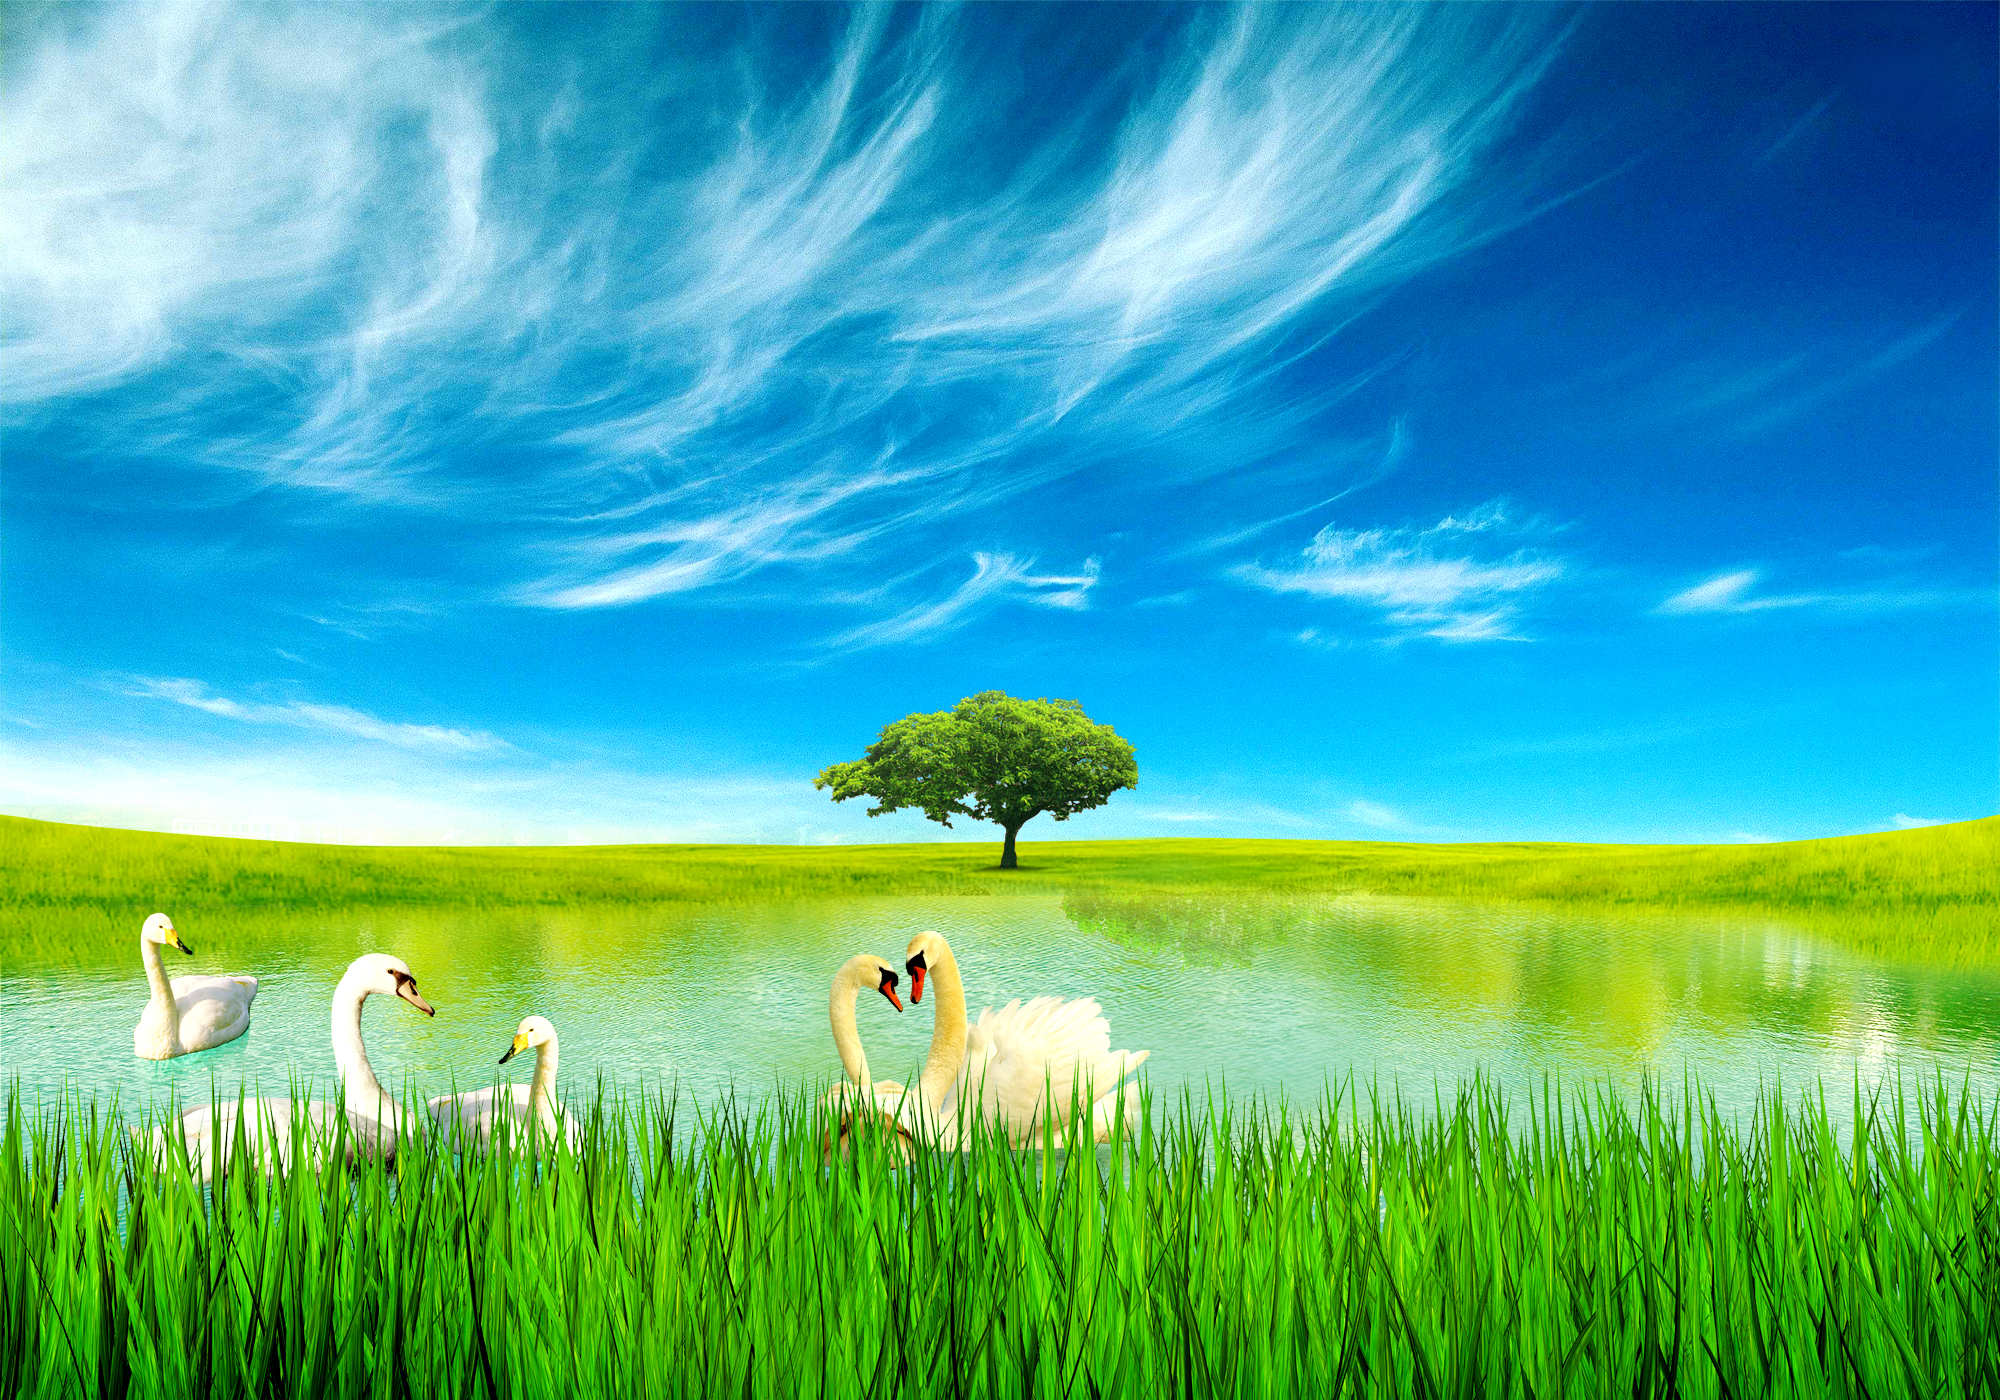 background nature images for photoshop free download